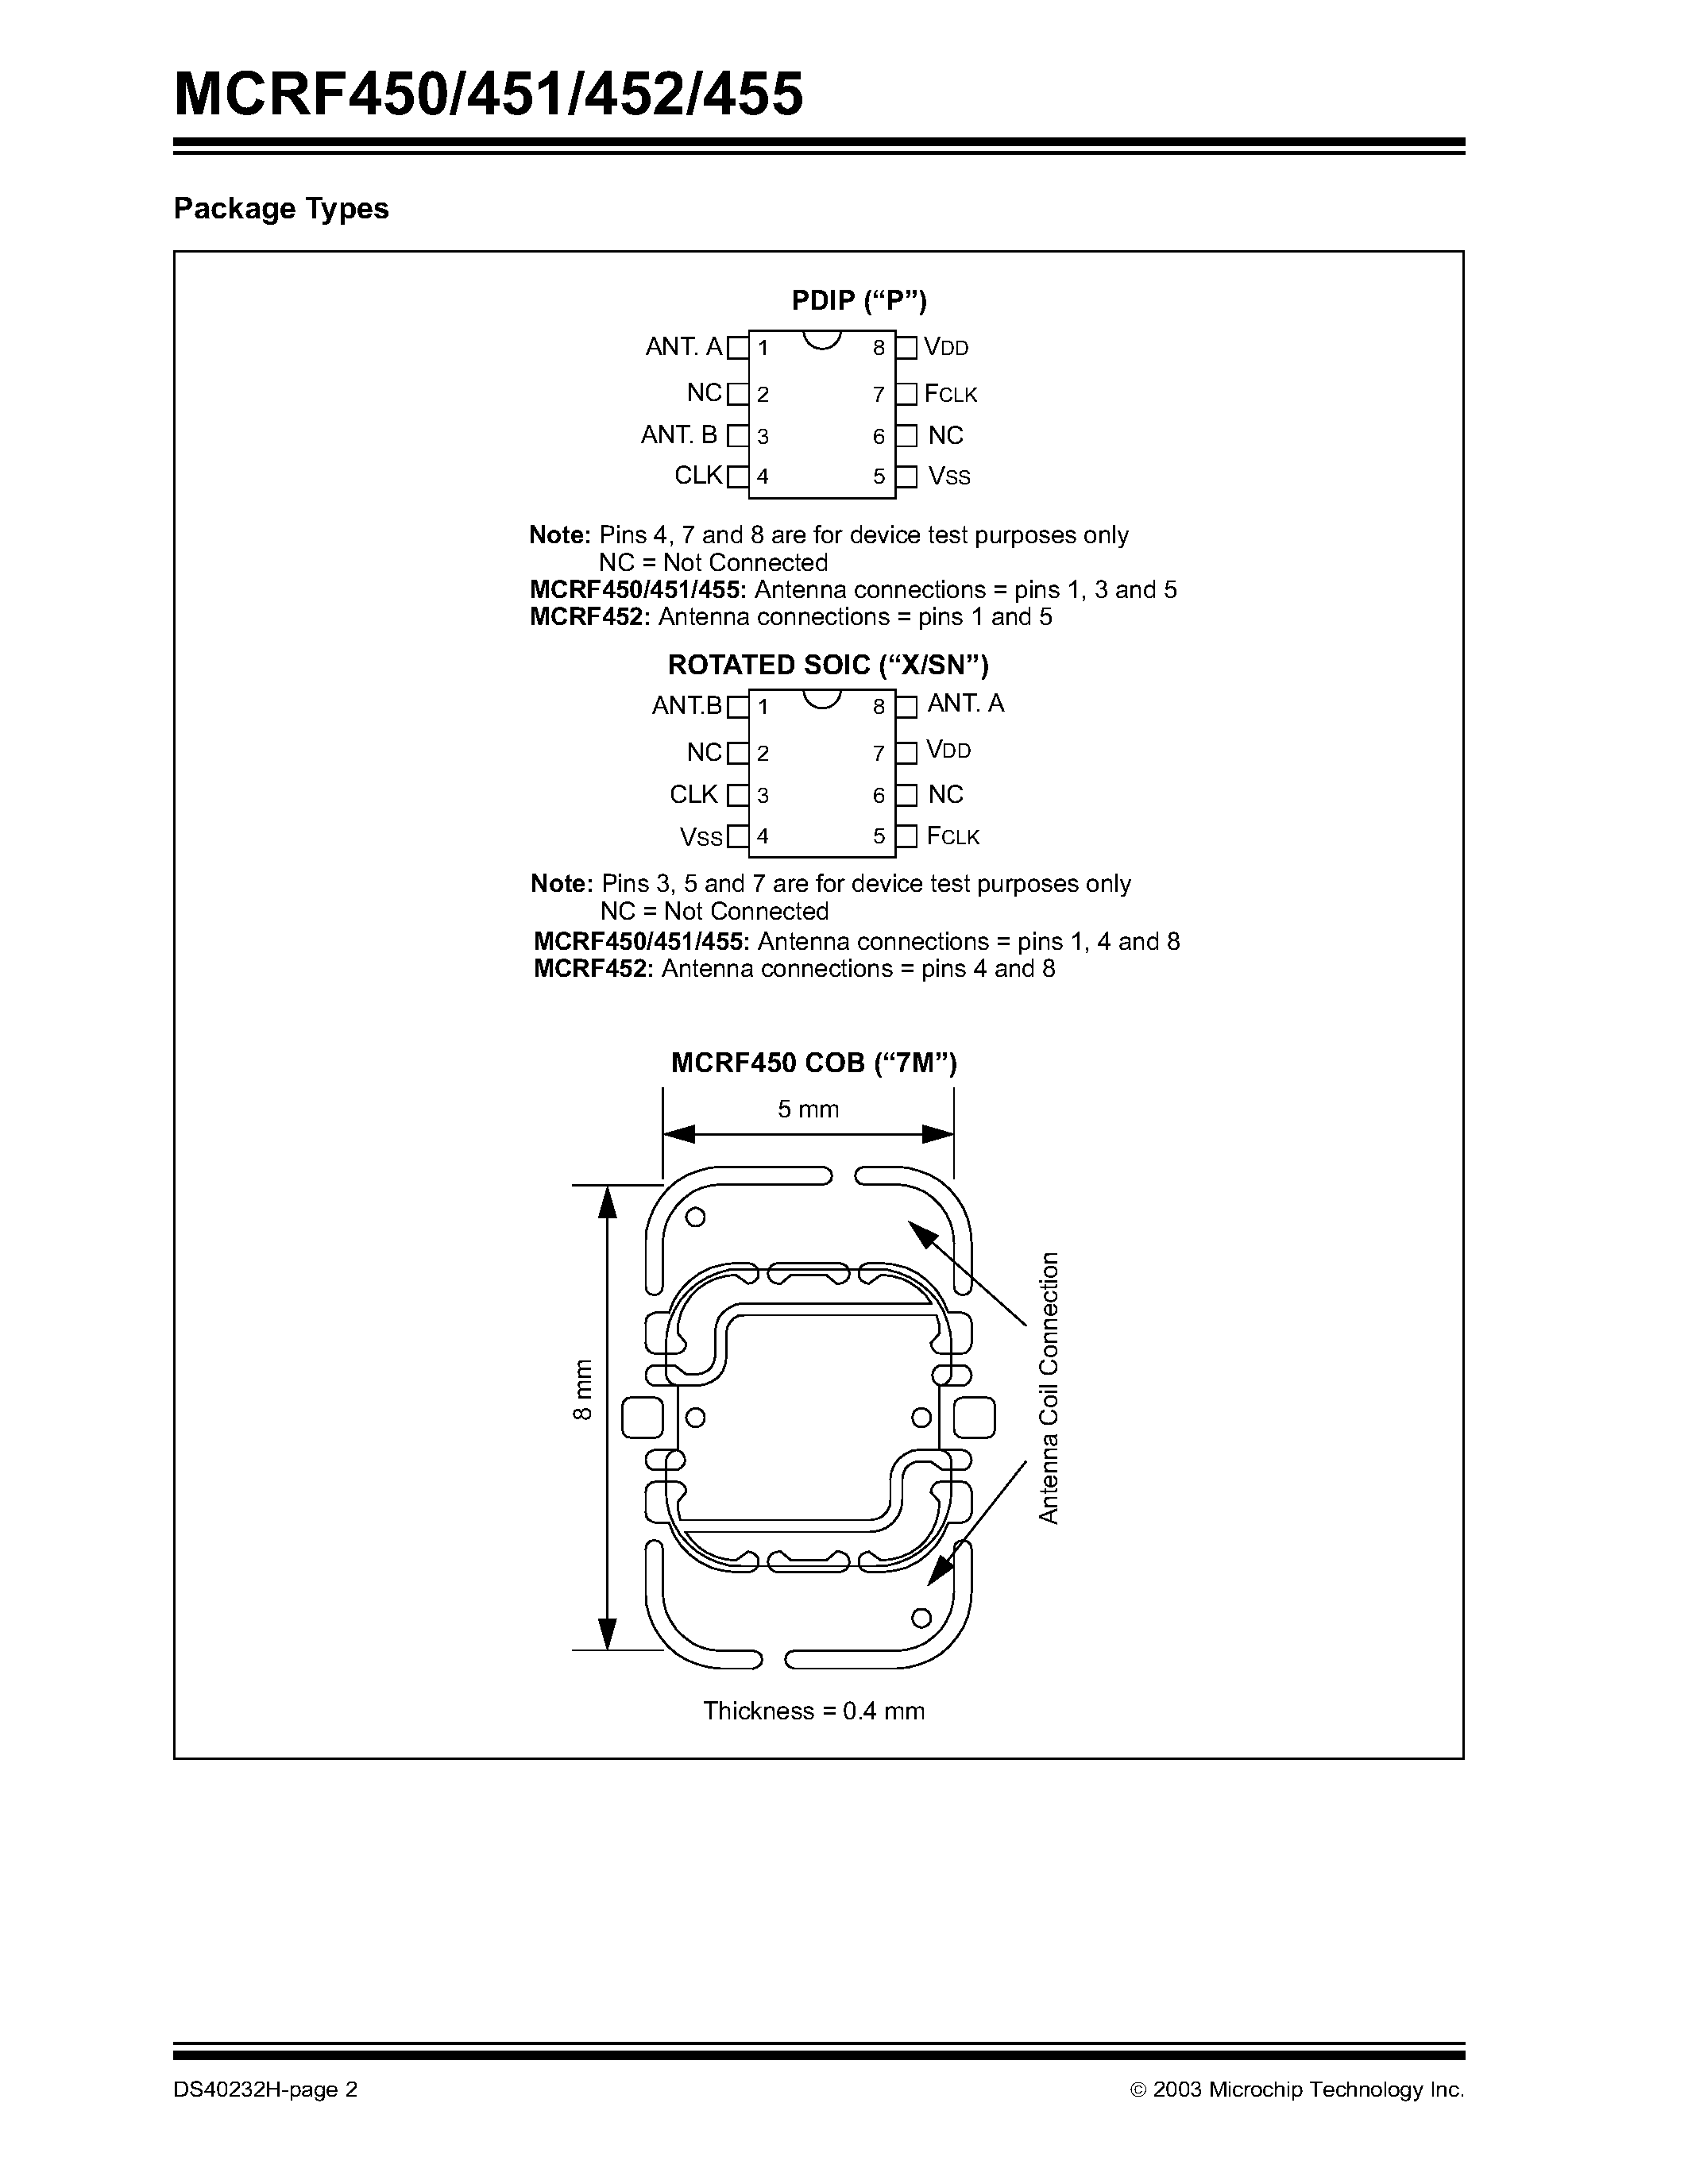 Datasheet MCRF455 - 13.56 MHz Read/Write Passive RFID Device page 2